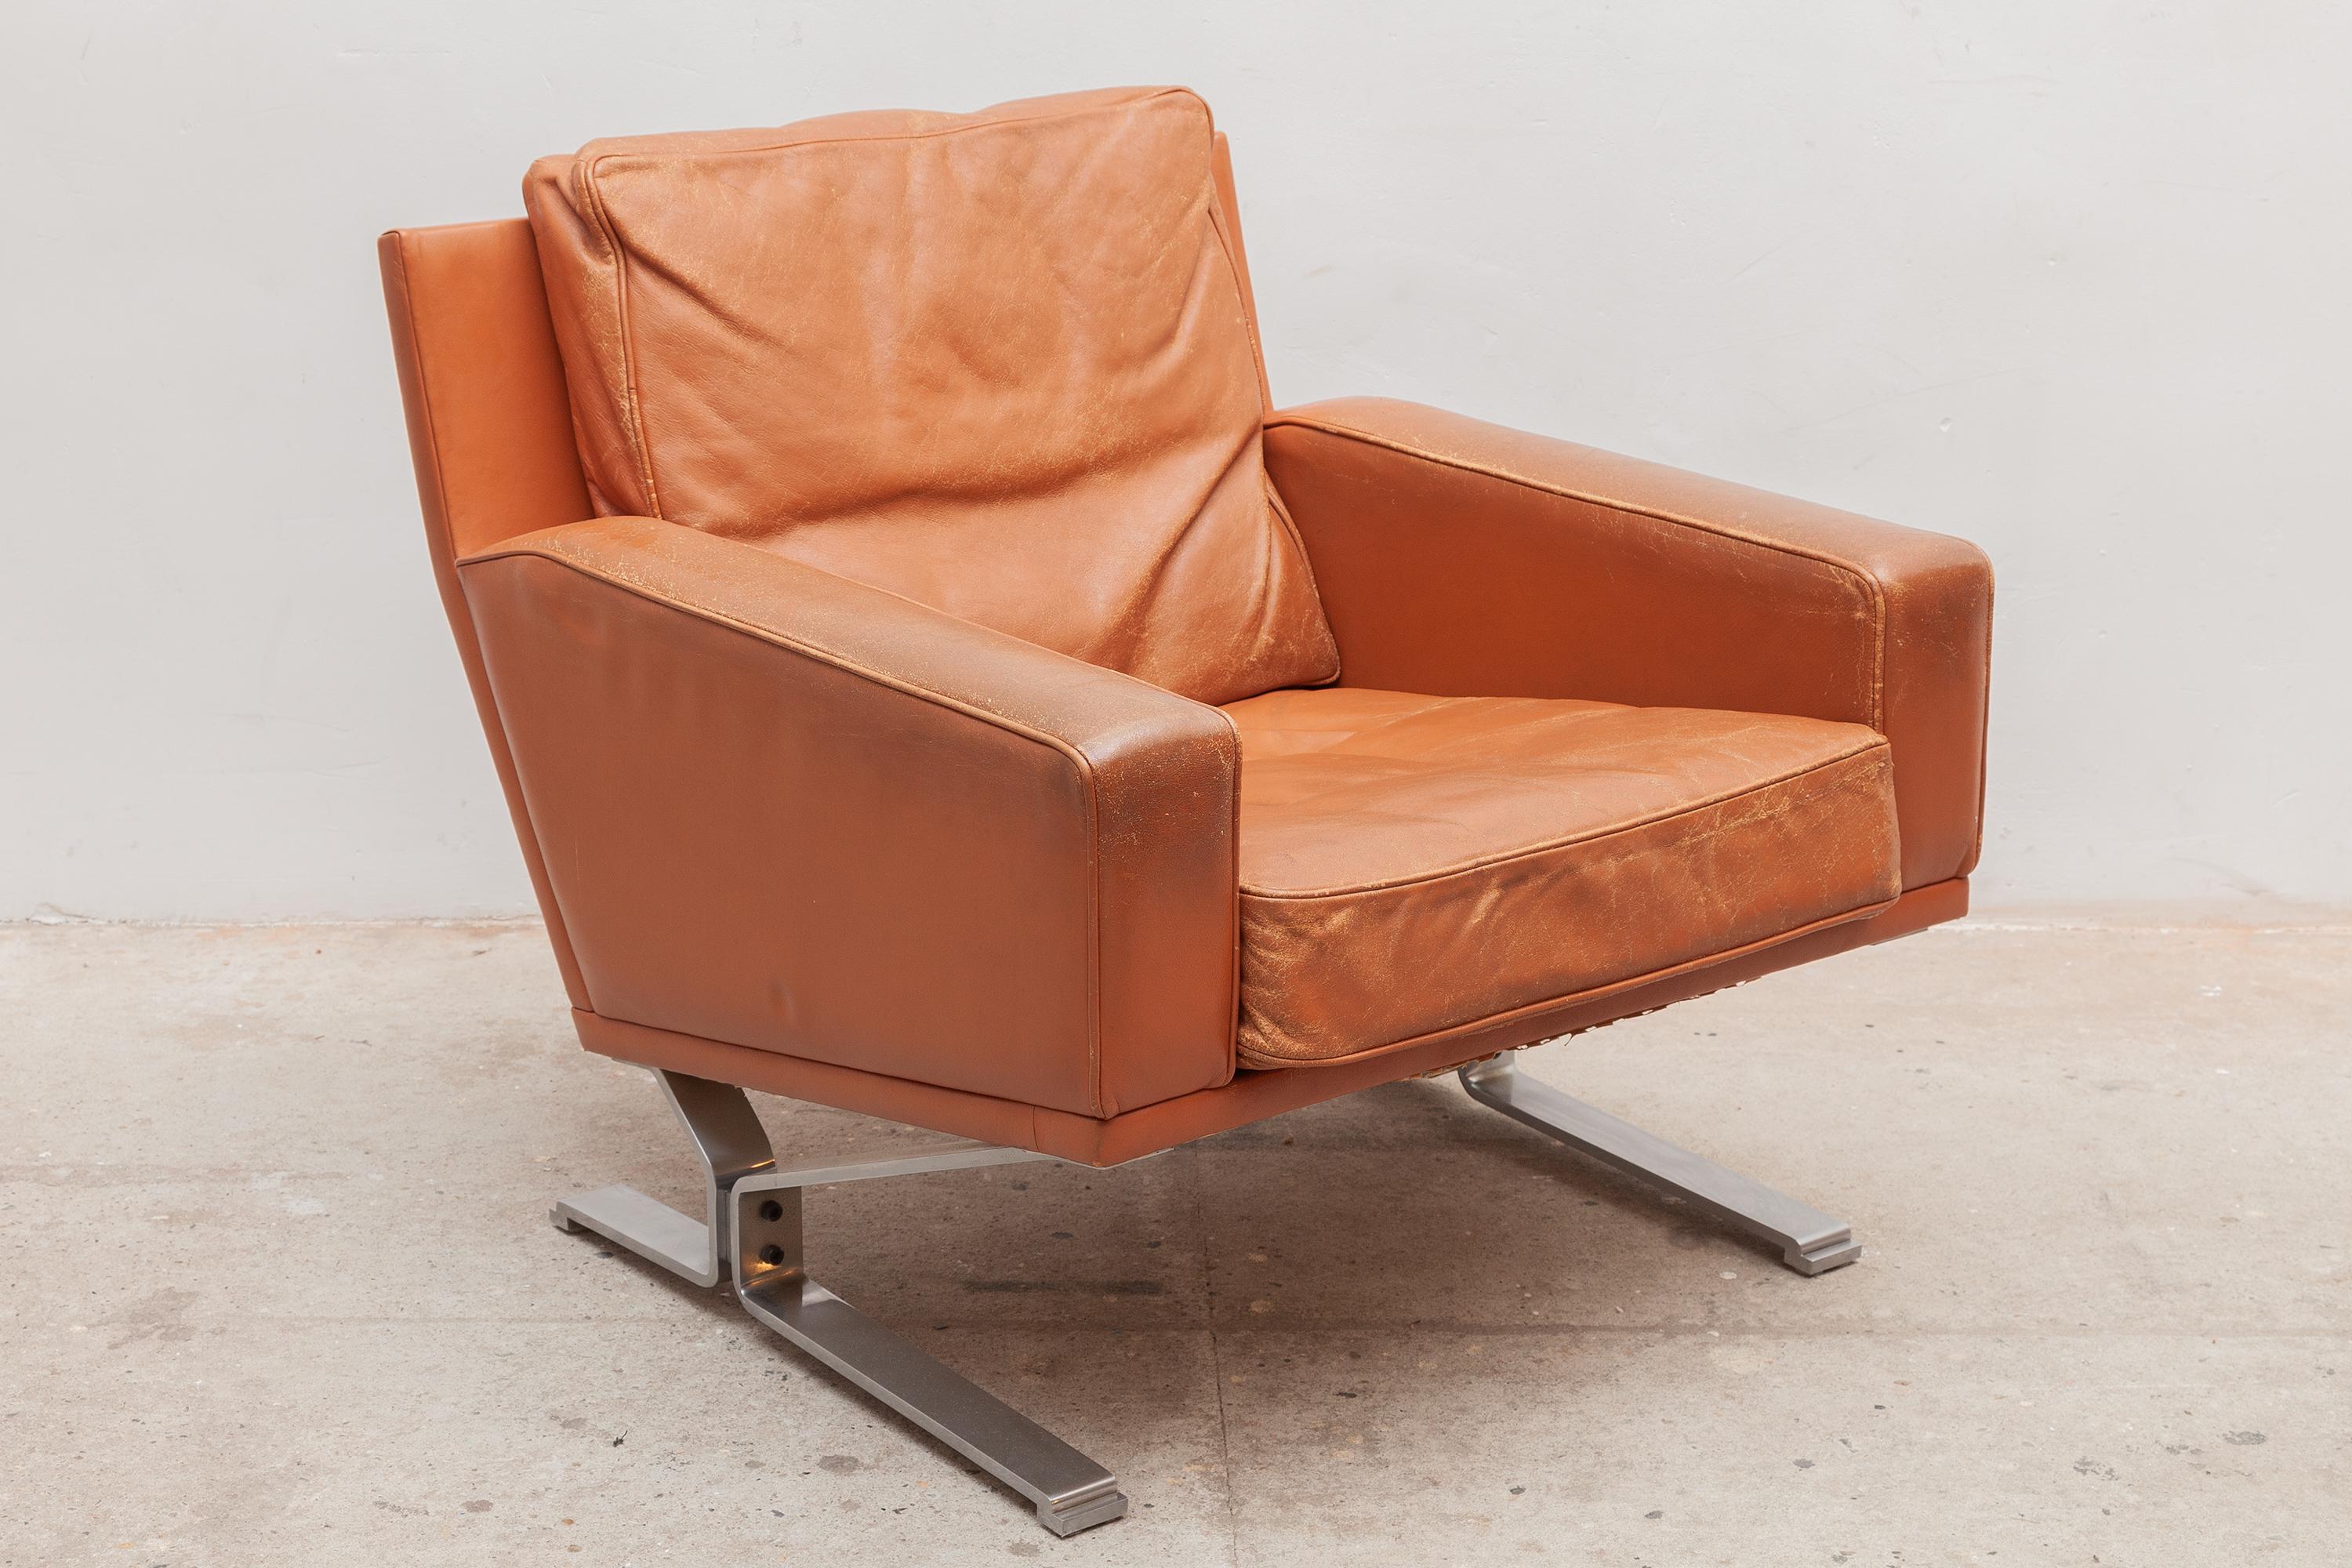 Danish Mid-Century Modern Cognac Leather Club Chairs 1960s with a Nice Patina